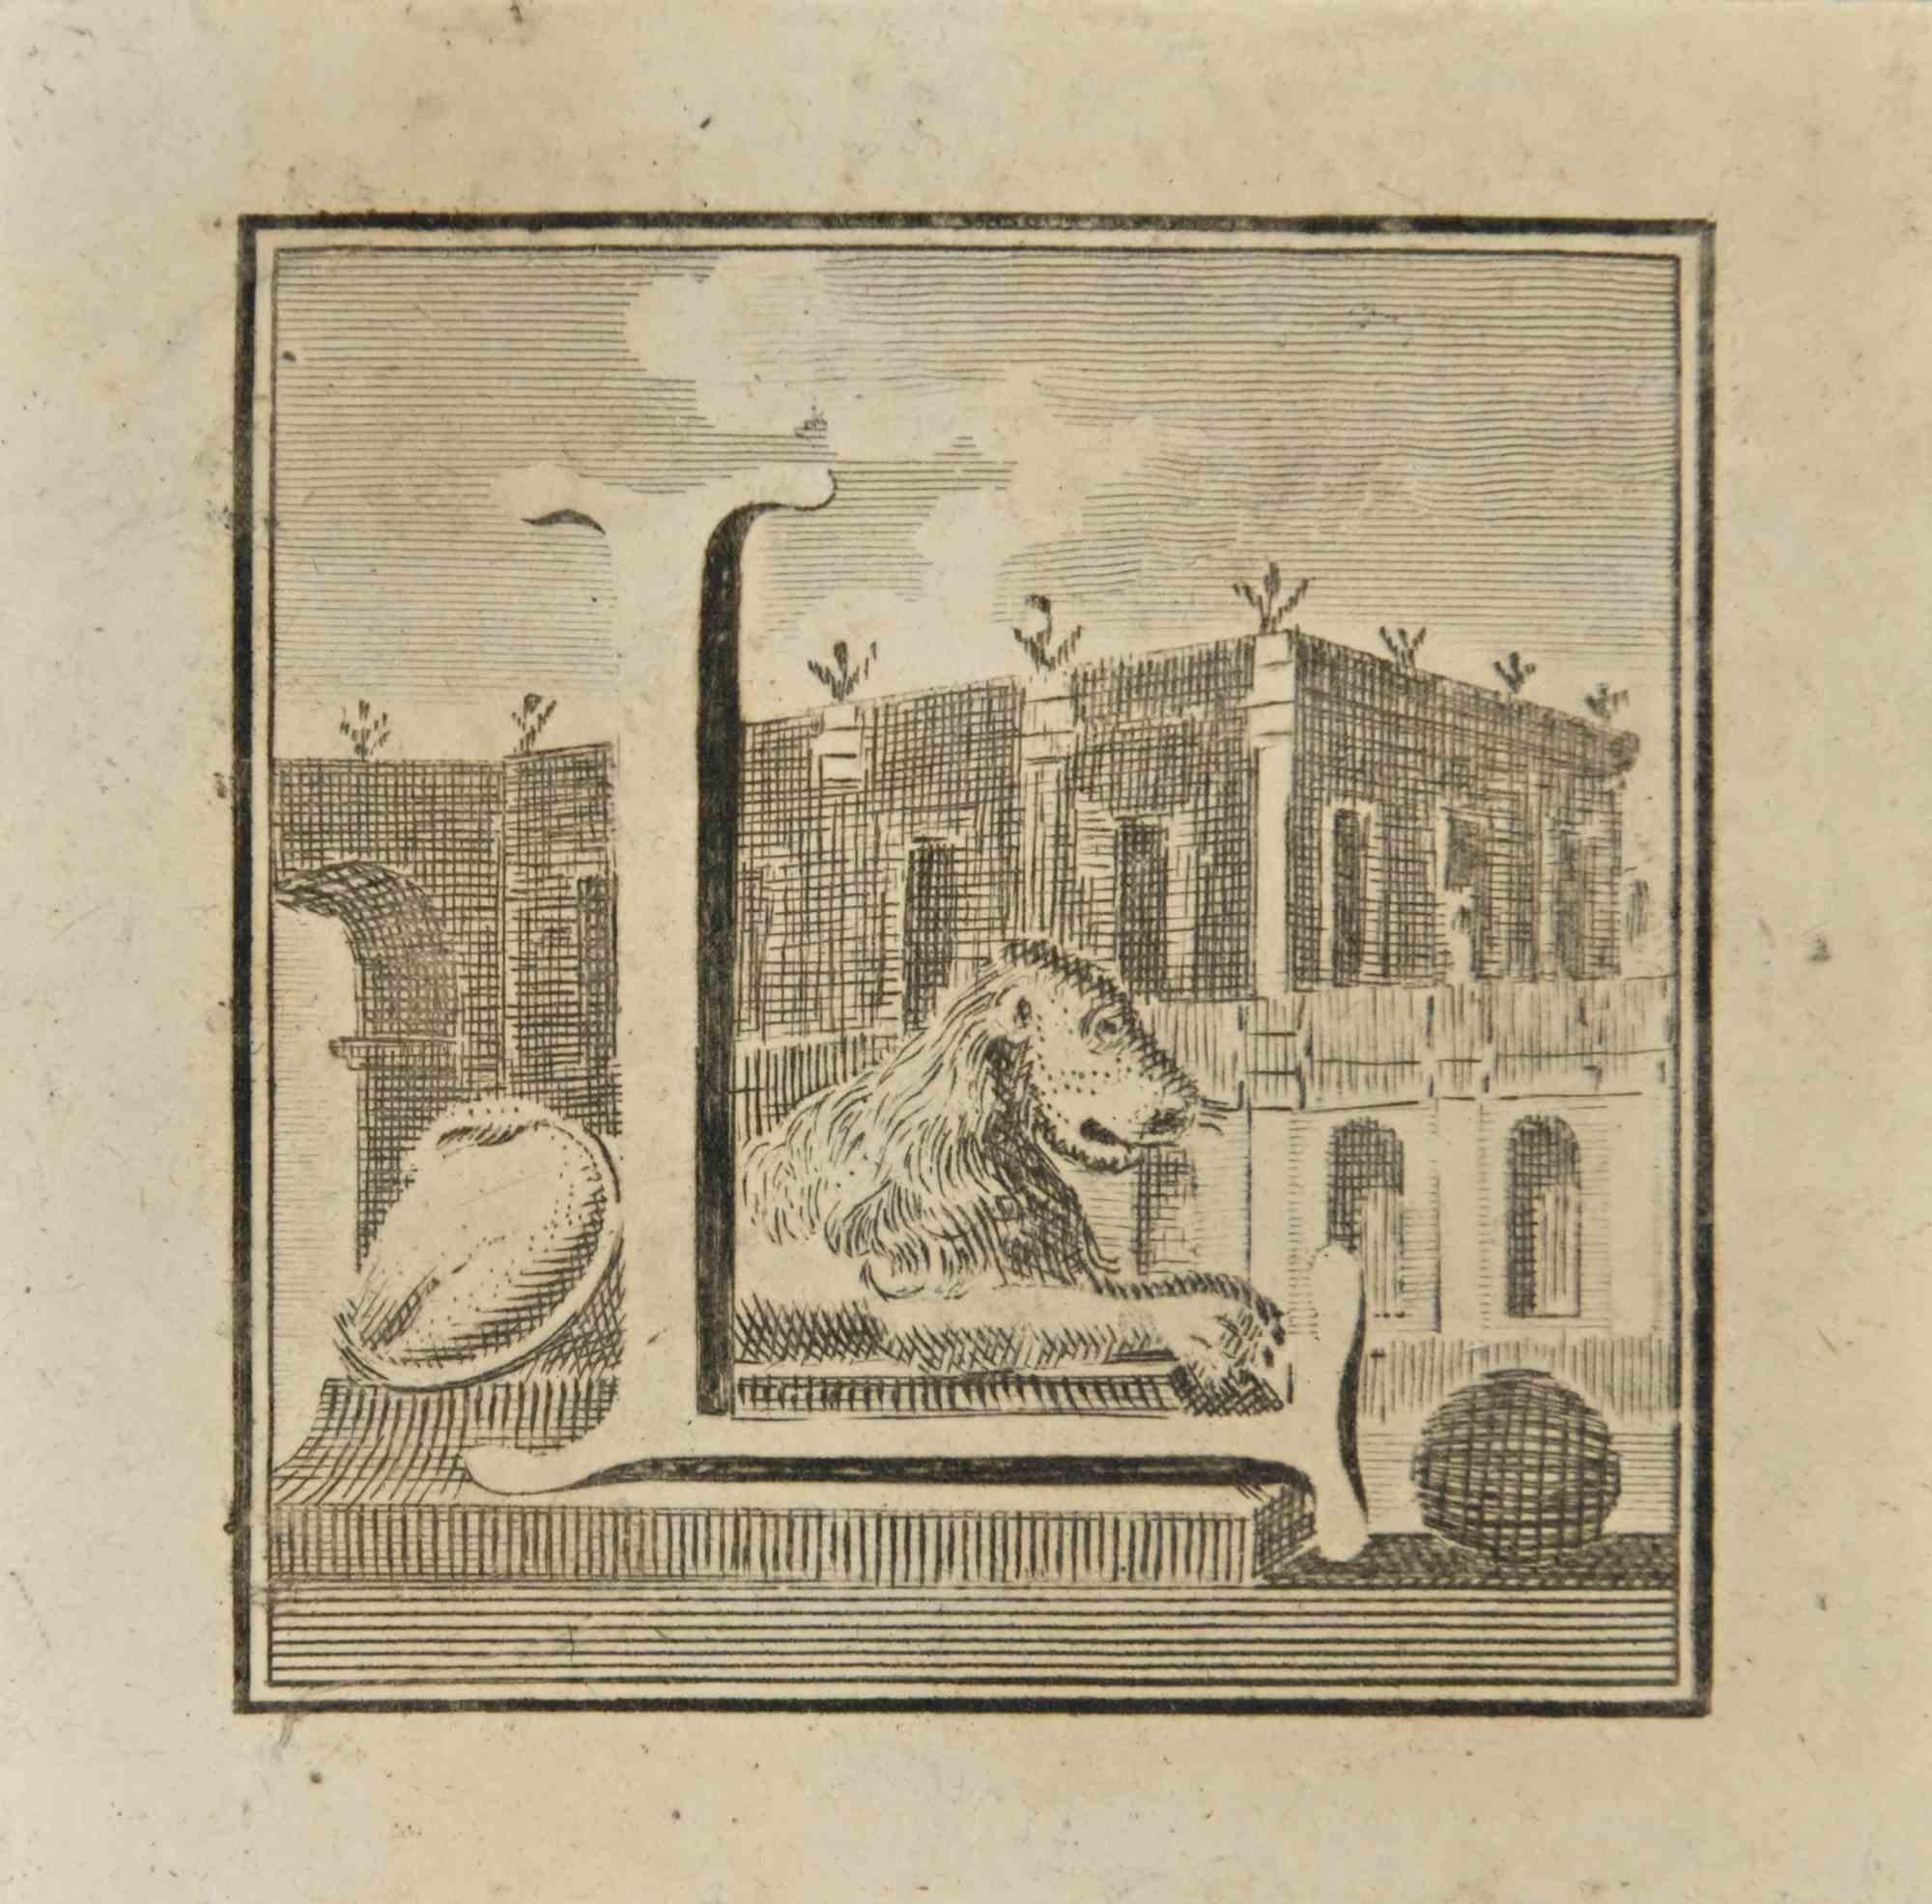 Letter of the Alphabet L,  from the series "Antiquities of Herculaneum", is an etching on paper realized by Luigi Vanvitelli in the 18th century.

Good conditions with minor foxing.

The etching belongs to the print suite “Antiquities of Herculaneum